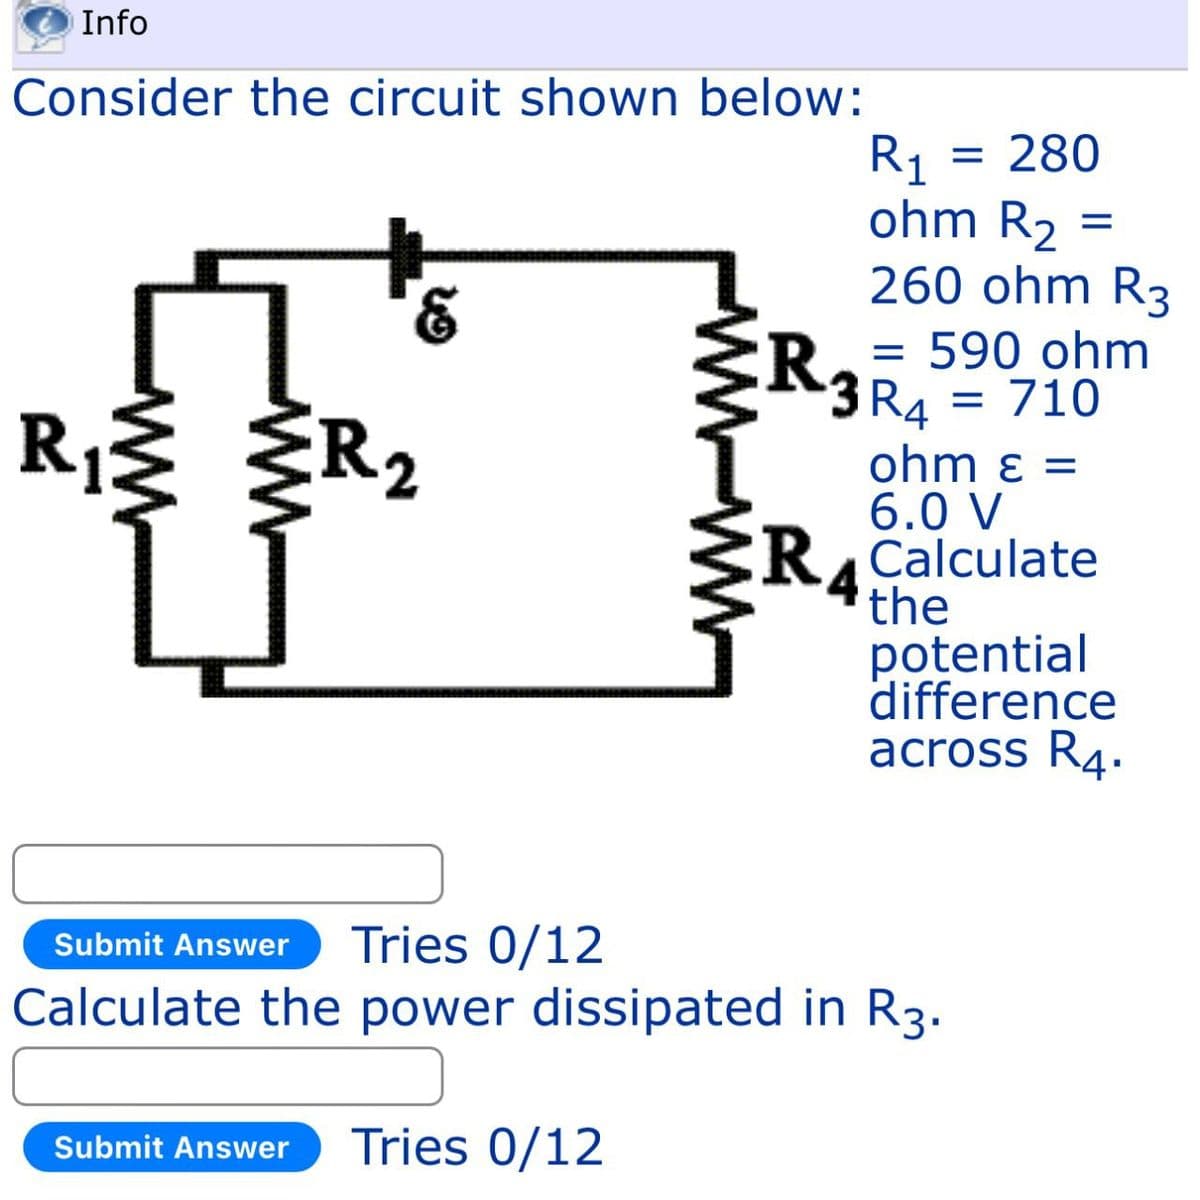 Info
Consider the circuit shown below:
R₁
ww
WW
R1
= 280
ohm R2
=
260 ohm R3
R
= 590 ohm
·3 R4
2
= 710
ohm ε =
6.0 V
RCalculate
the
potential
difference
across R4.
Submit Answer
Tries 0/12
Calculate the power dissipated in R3.
Submit Answer Tries 0/12